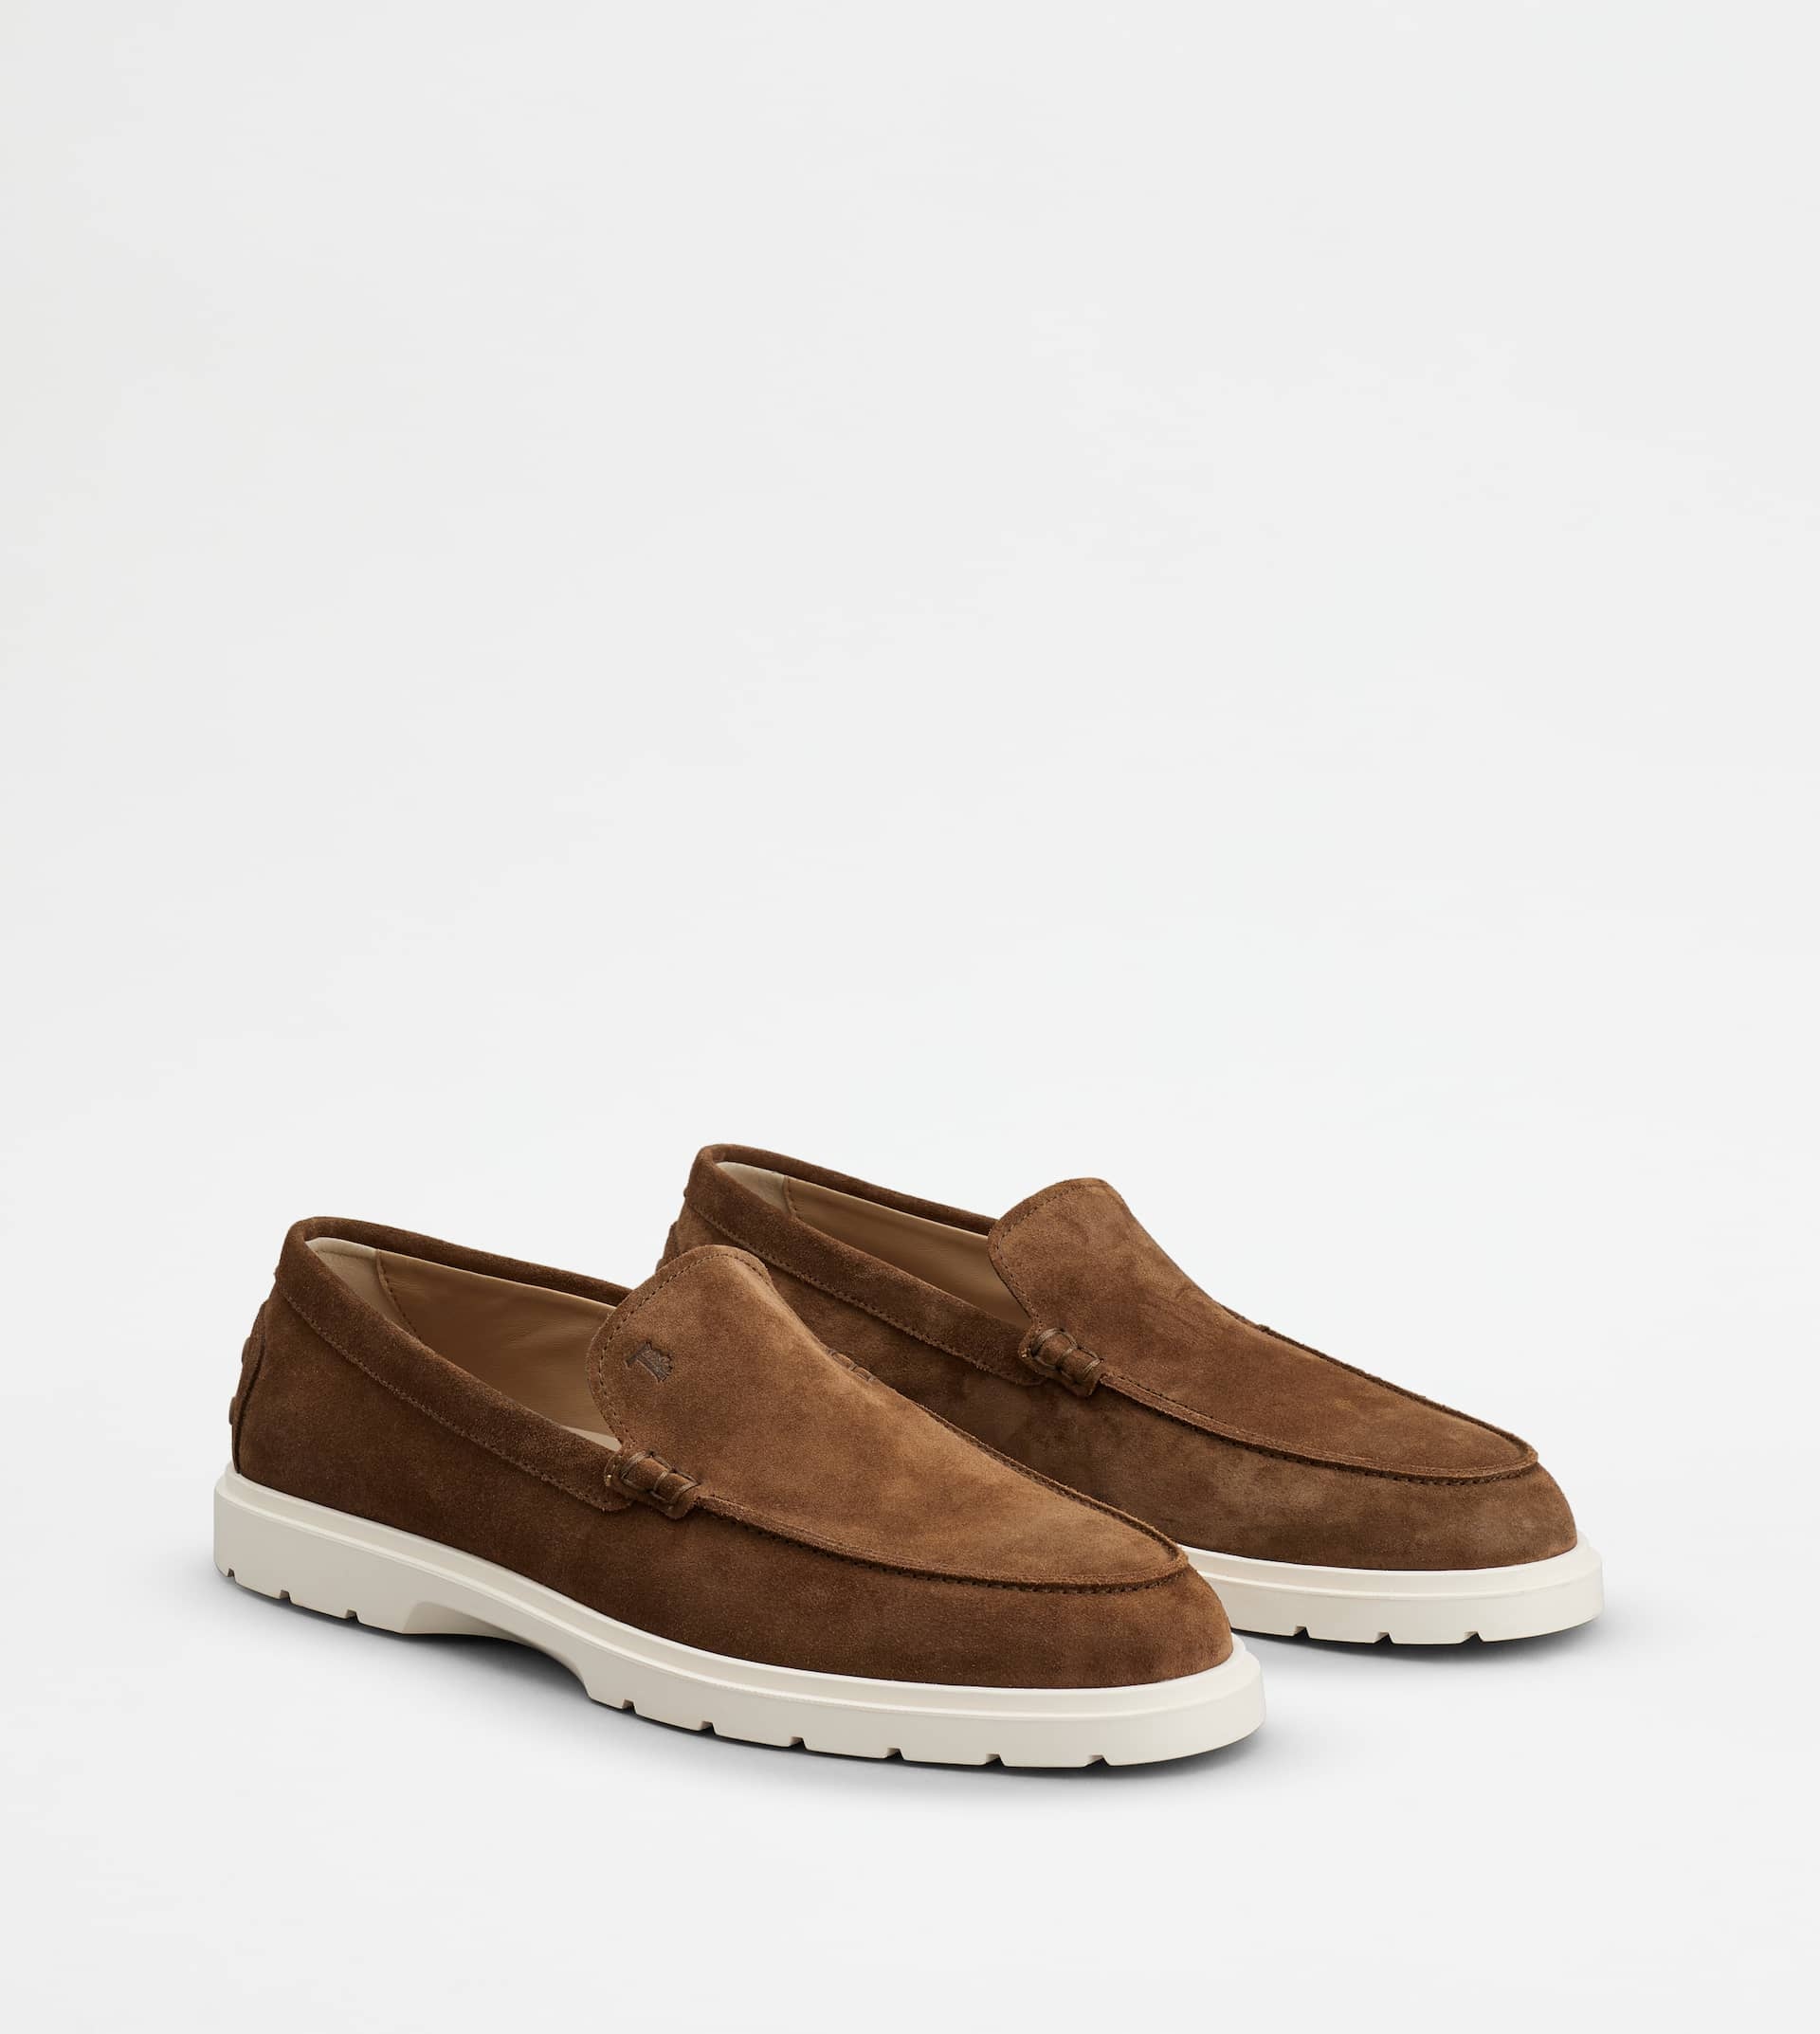 SLIPPER LOAFERS IN SUEDE - BROWN - 3